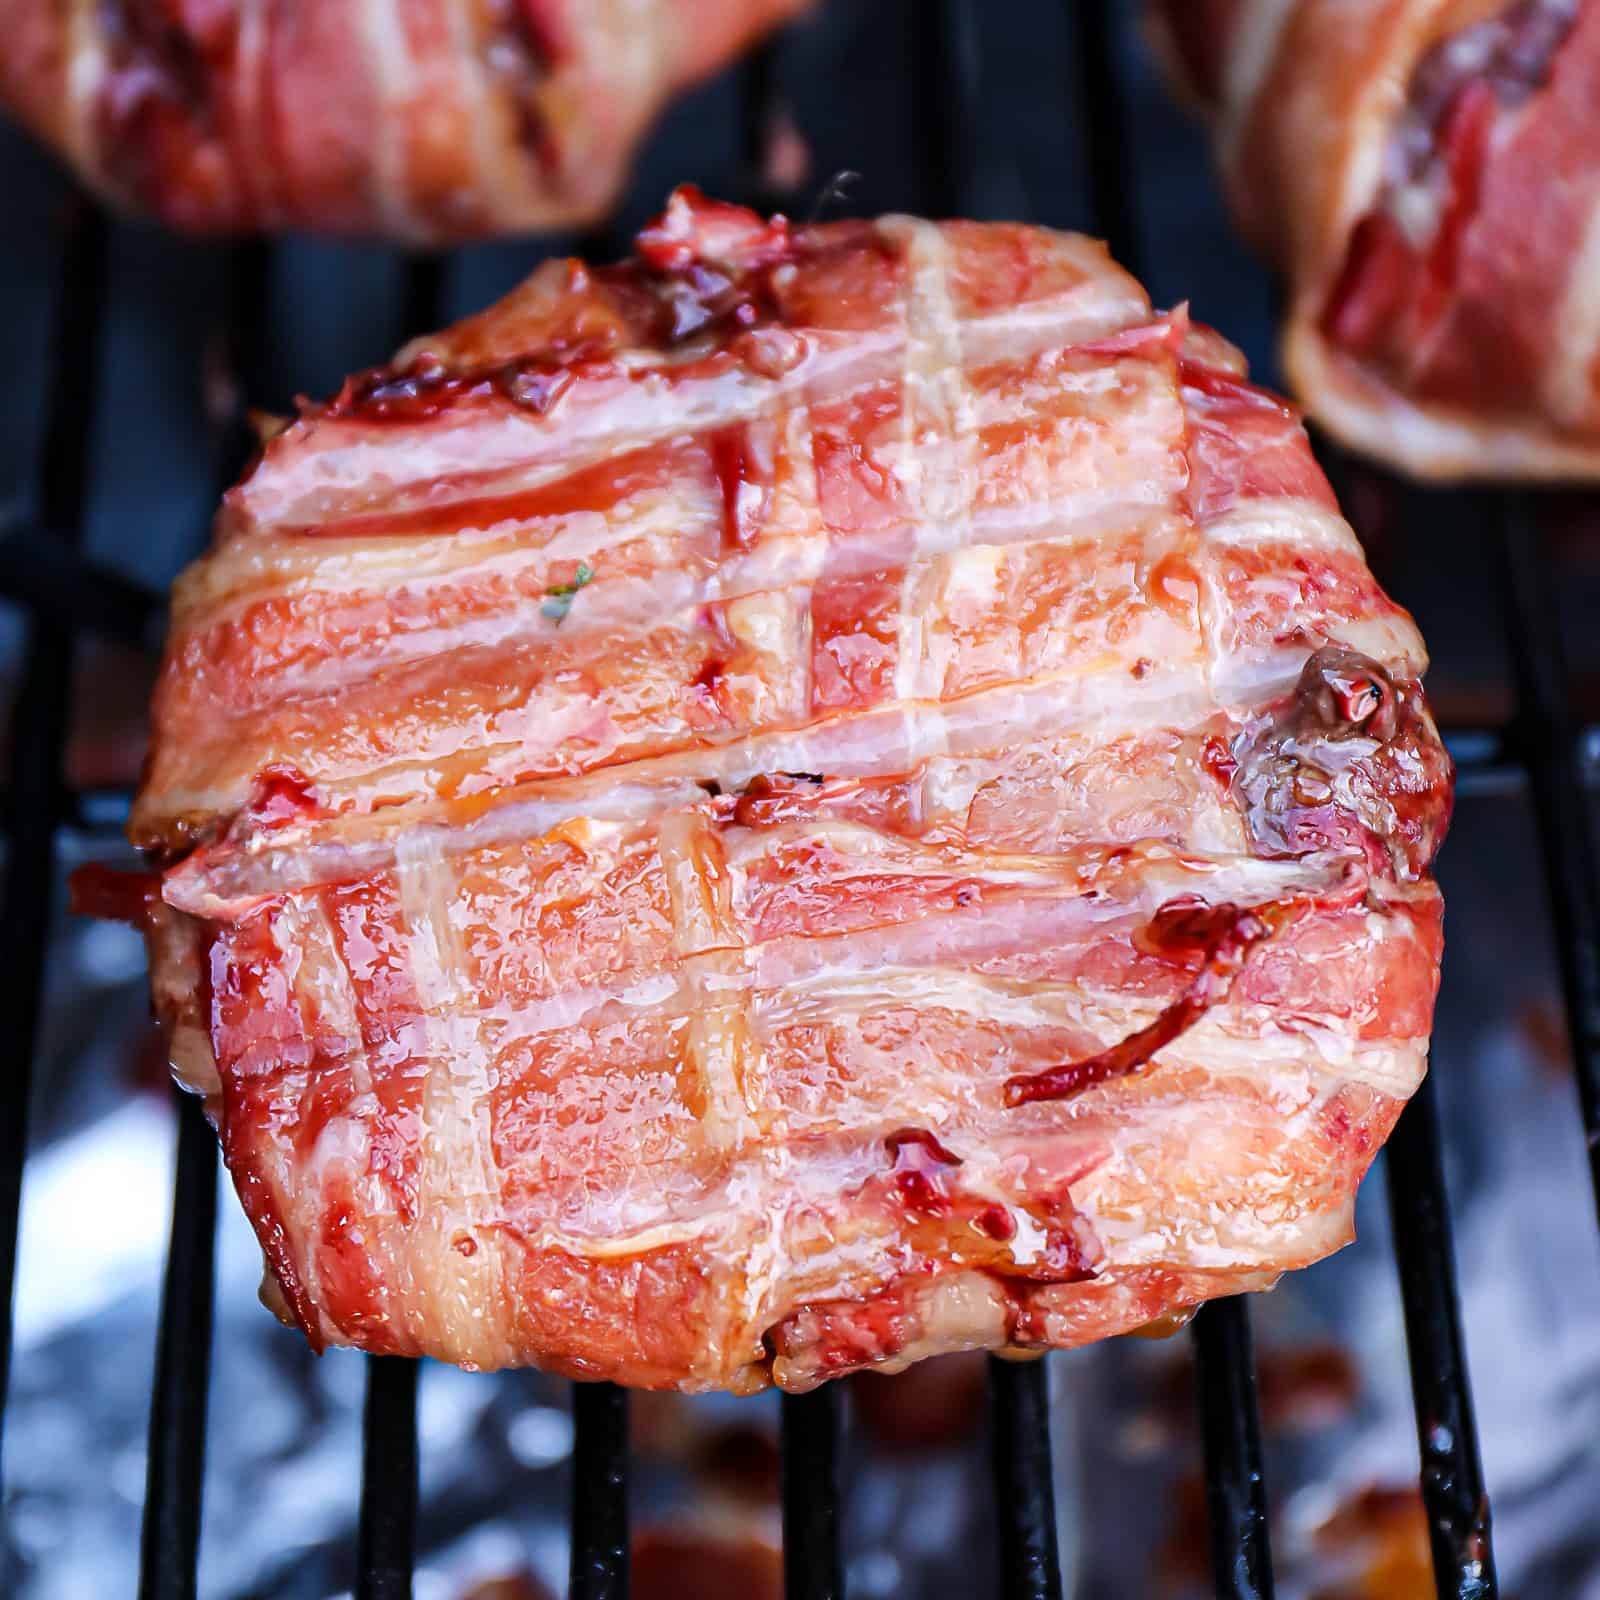 Smoked Bacon Wrapped Burgers Stuffed With Cheese Traeger Juicy Lucy Style